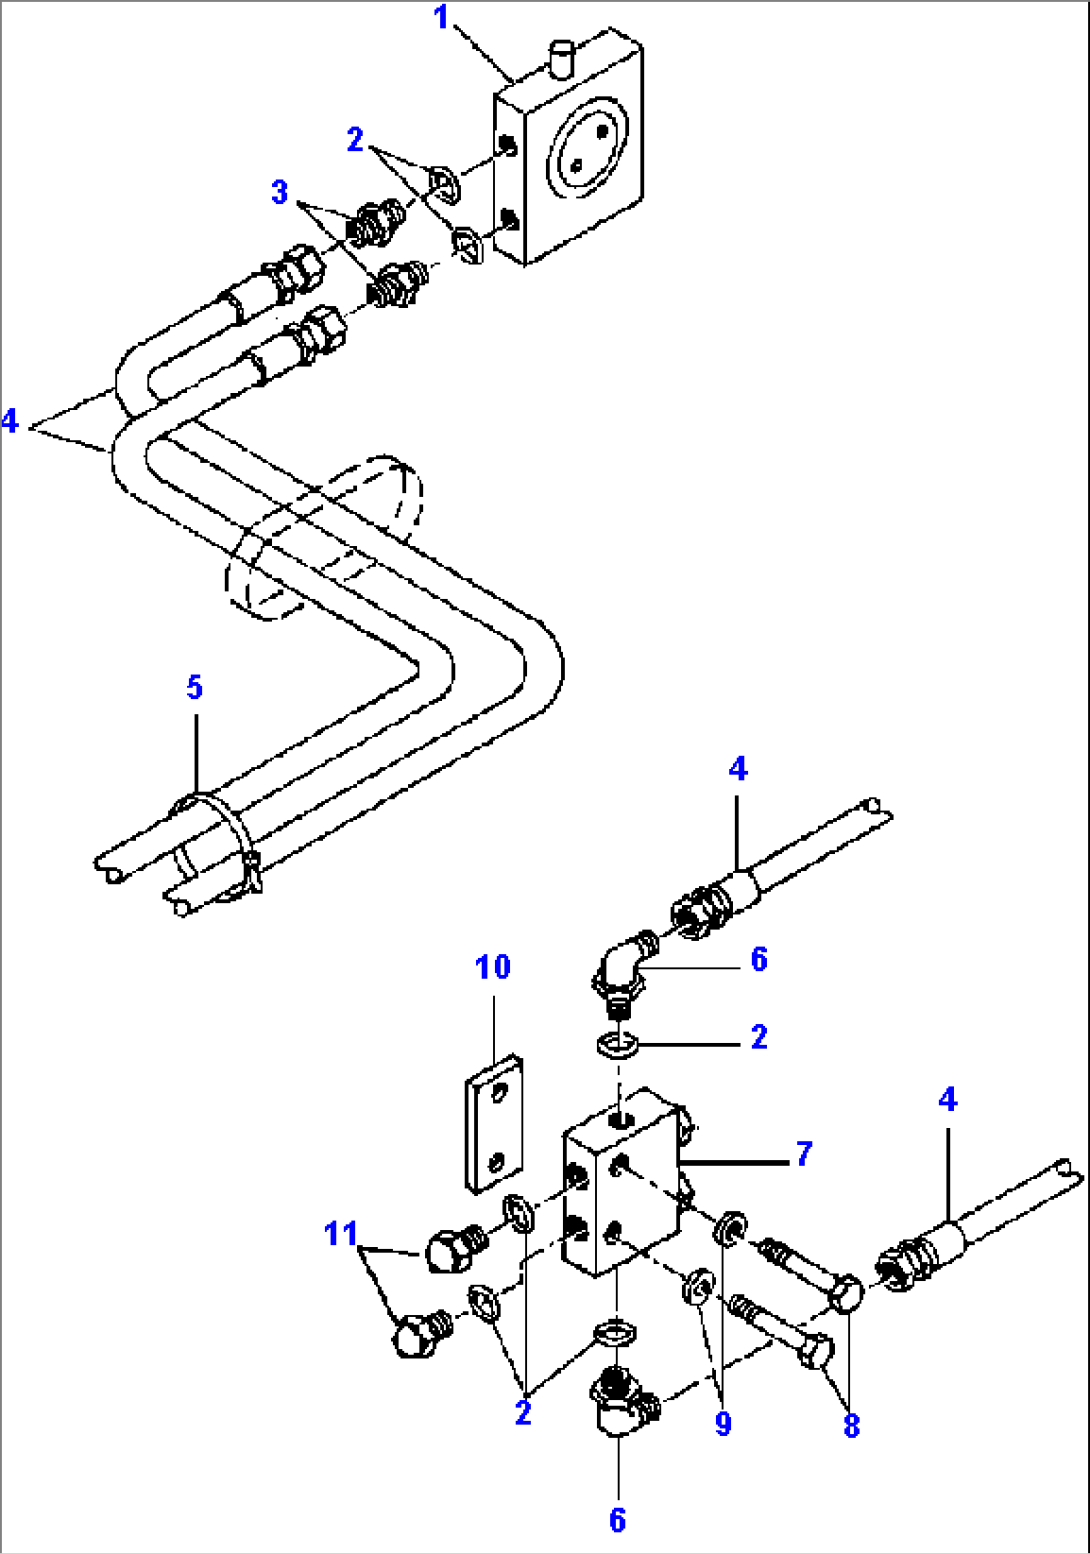 FIG. H5110-02A20 REAR WING POST CYLINDER ACTUATOR LINES